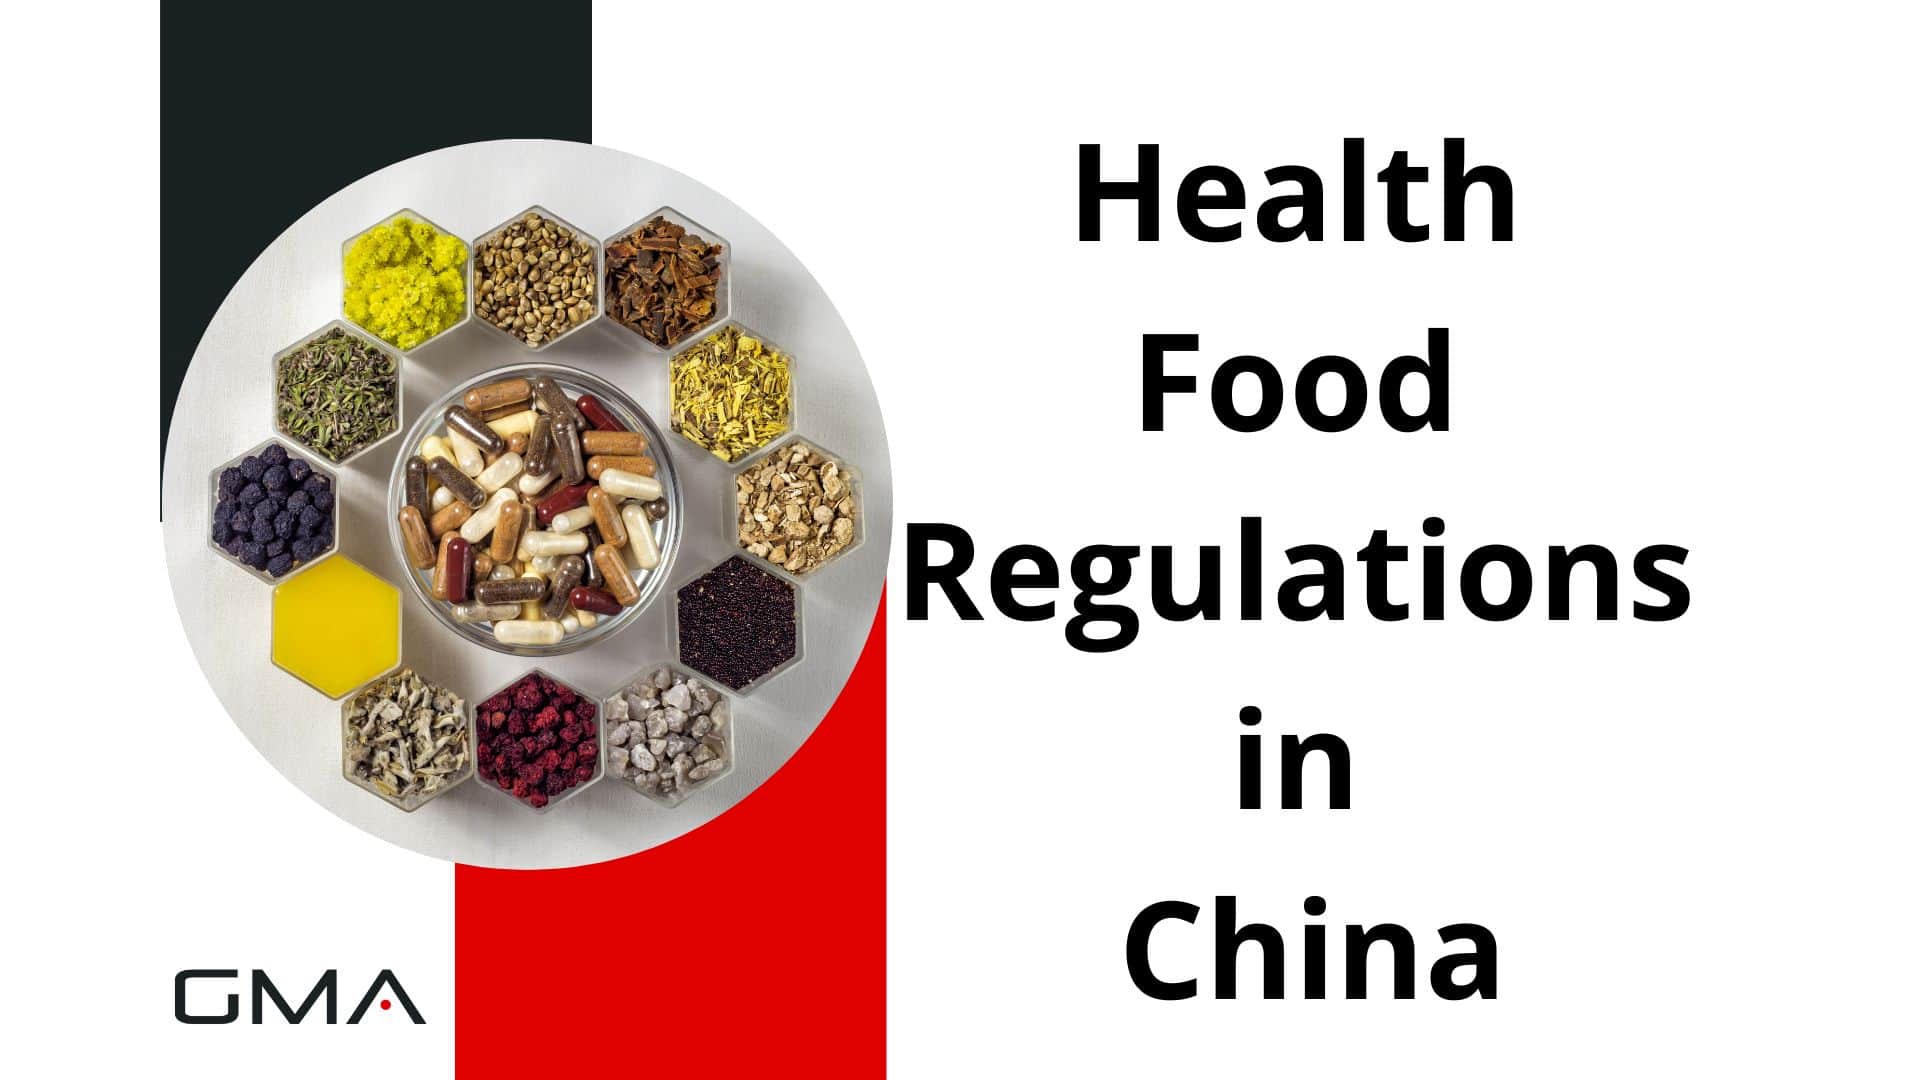 Market size of health and functional food in China